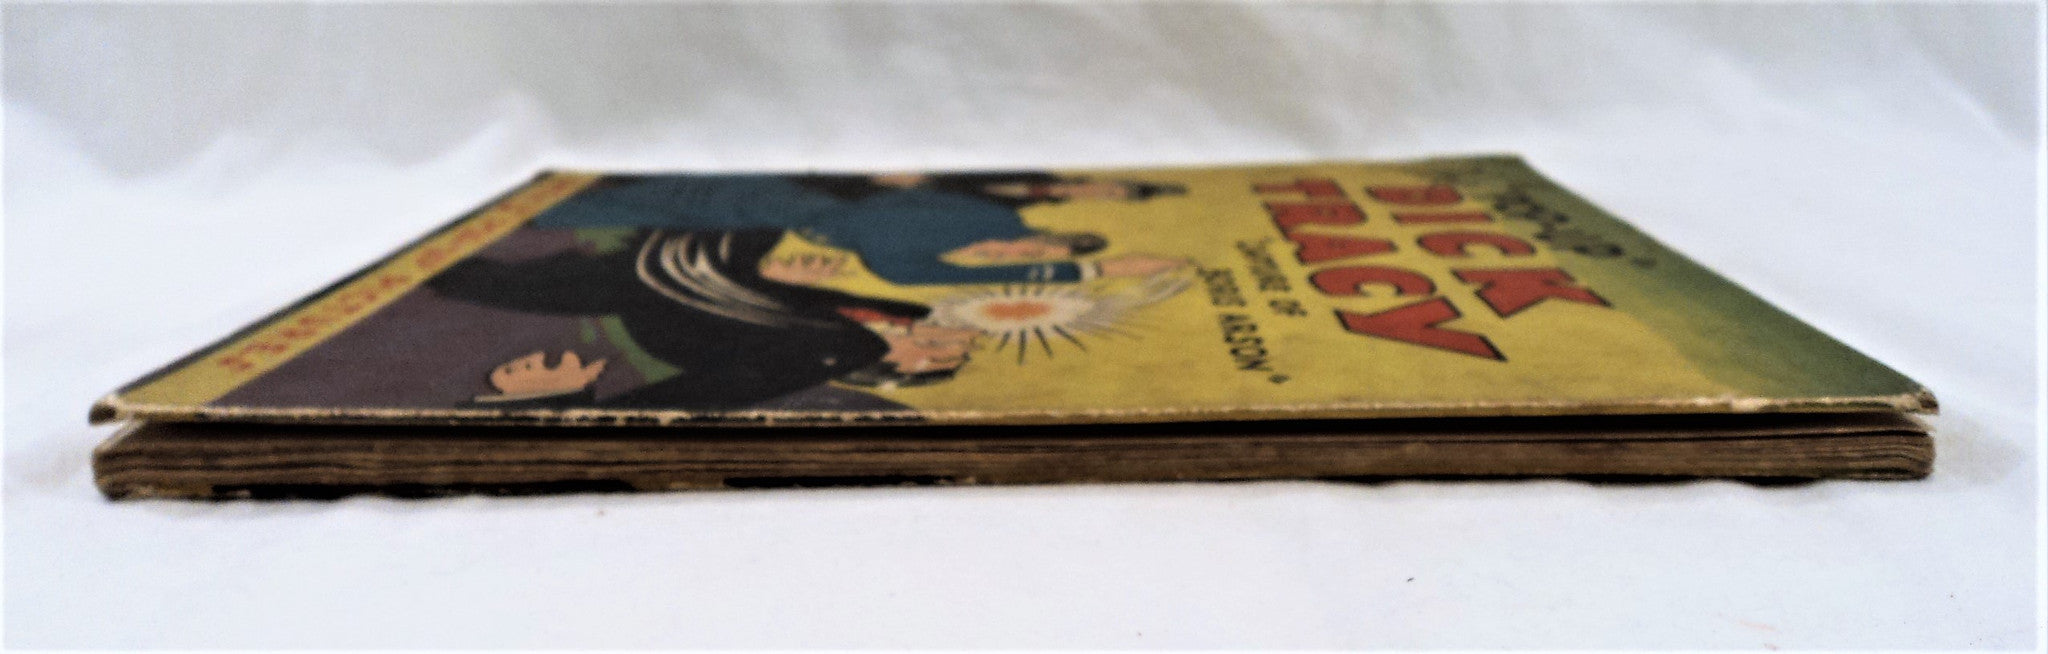 1935 The Pop-Up Dick Tracy Book